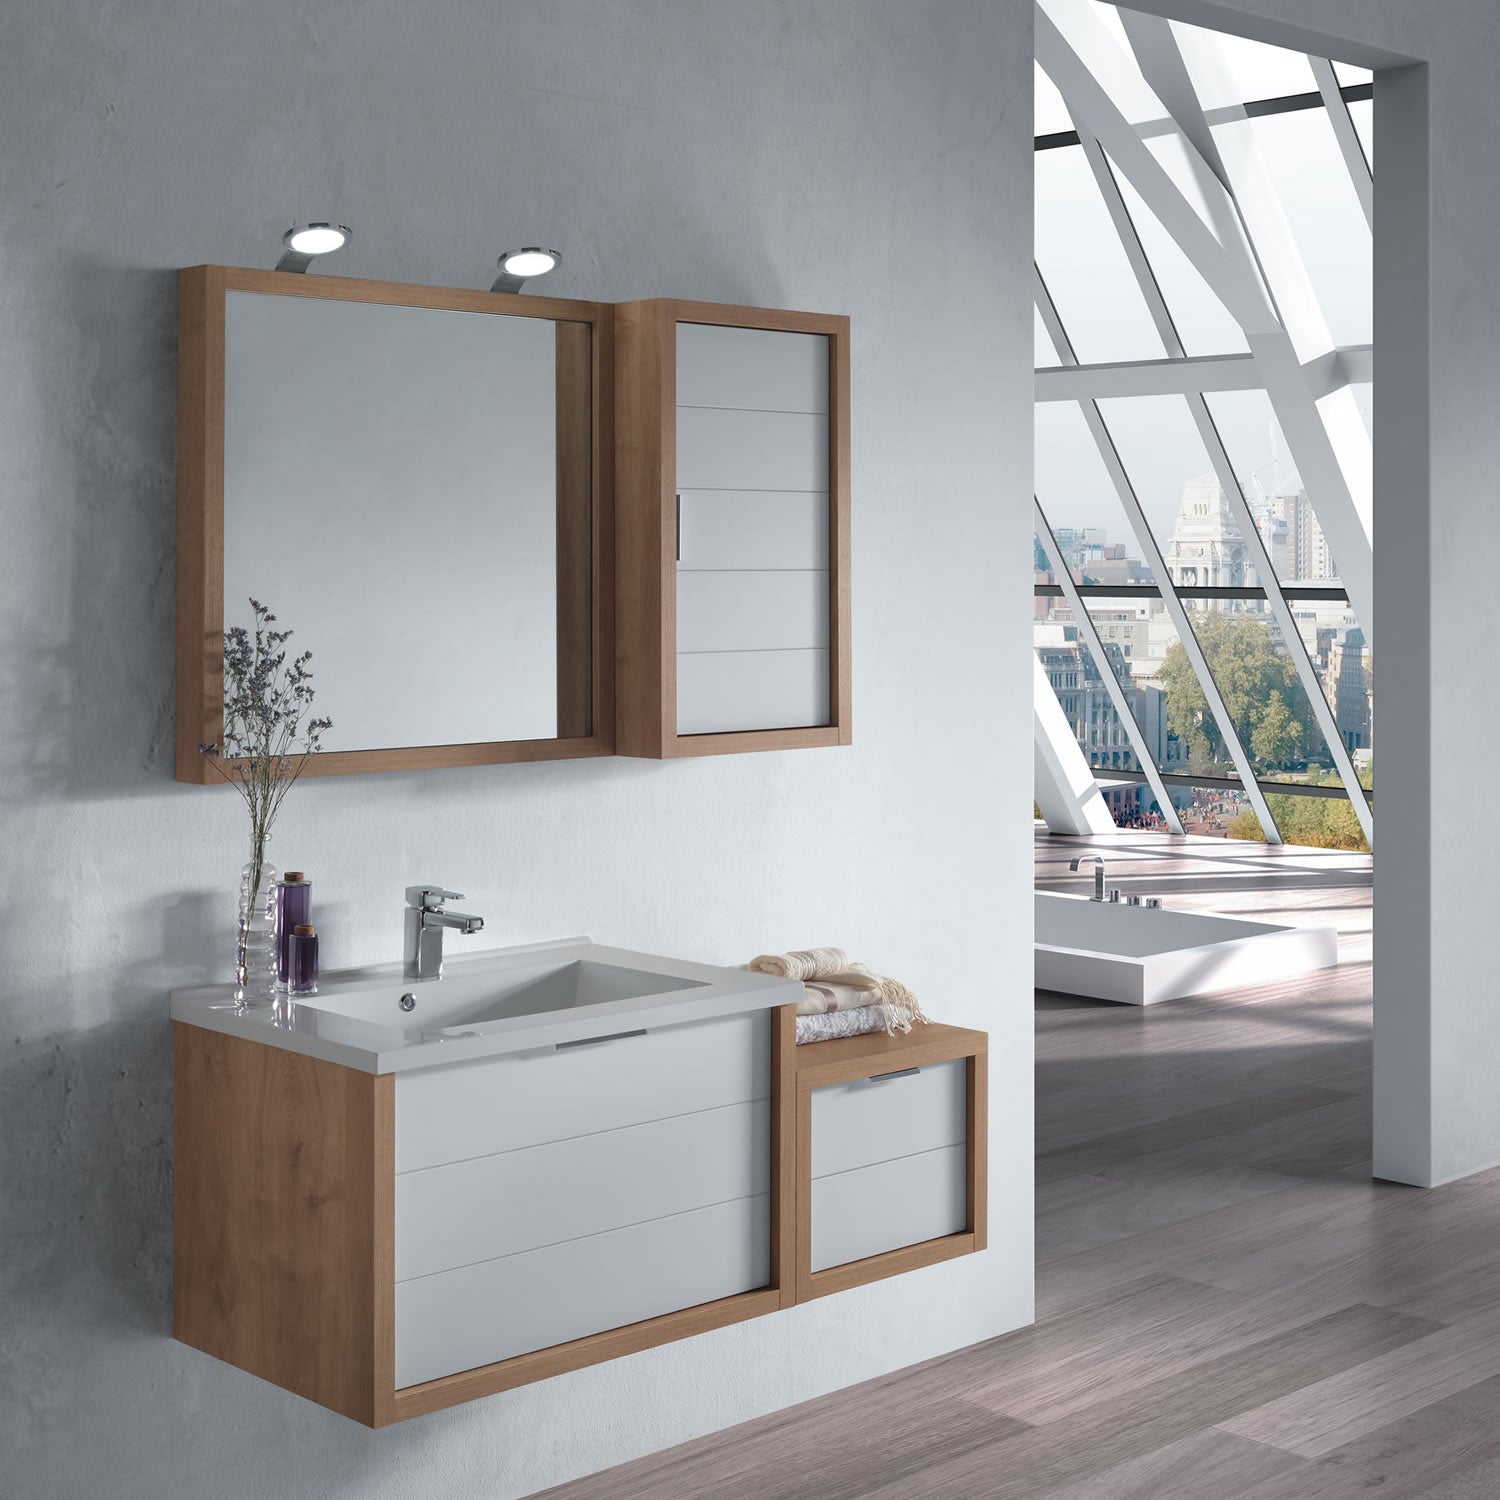 40" Single Vanity, Wall Mount, Drawer with Soft Close, Oak - White, Serie Tino by VALENZUELA